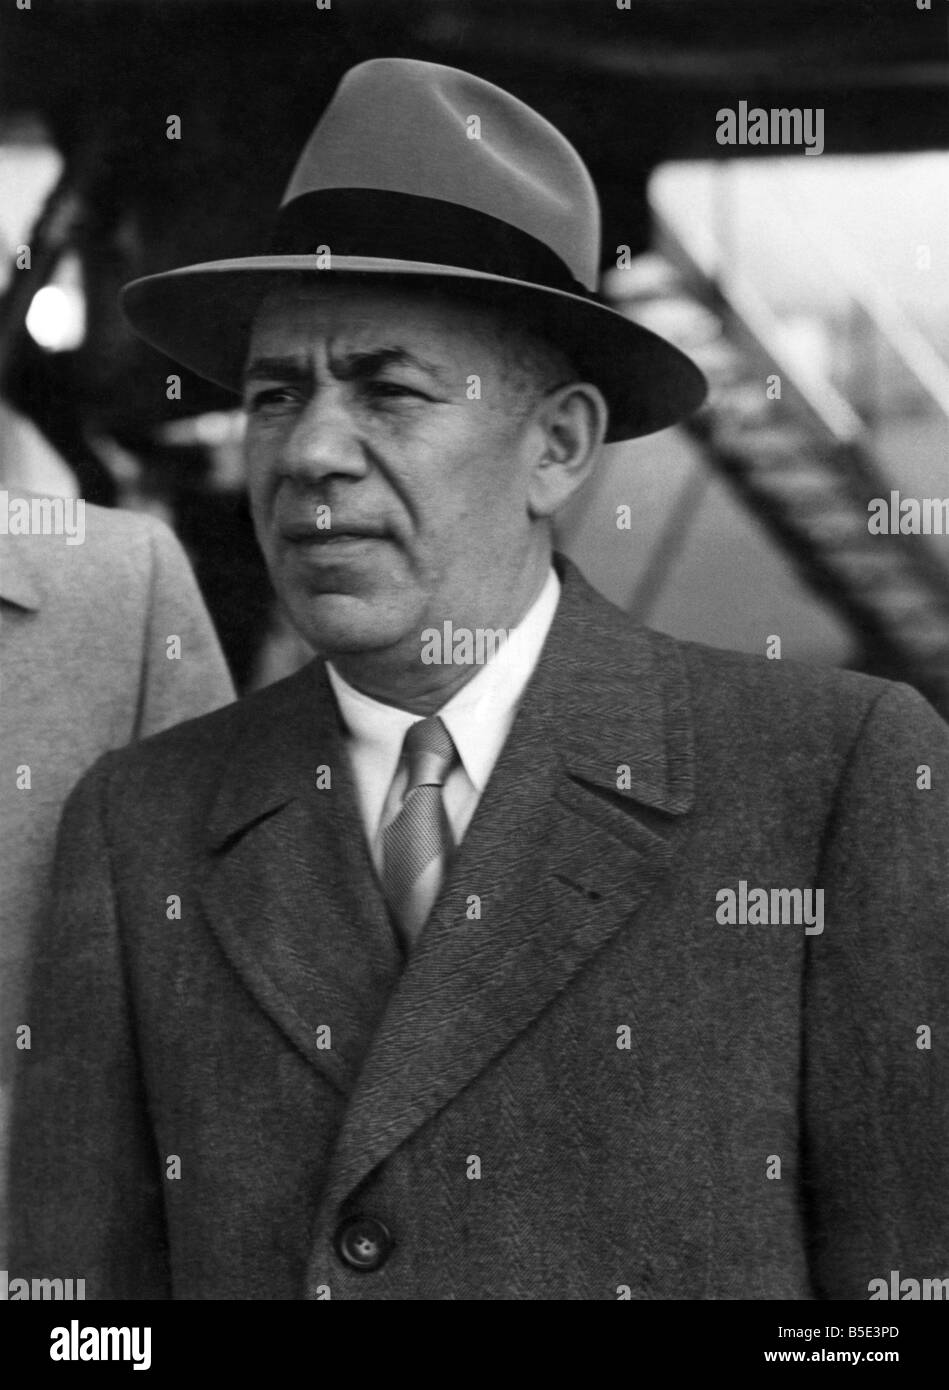 Jimmy Di Angelo. Boxing Manager seen here at London Airport. March 1954 P003119 Stock Photo